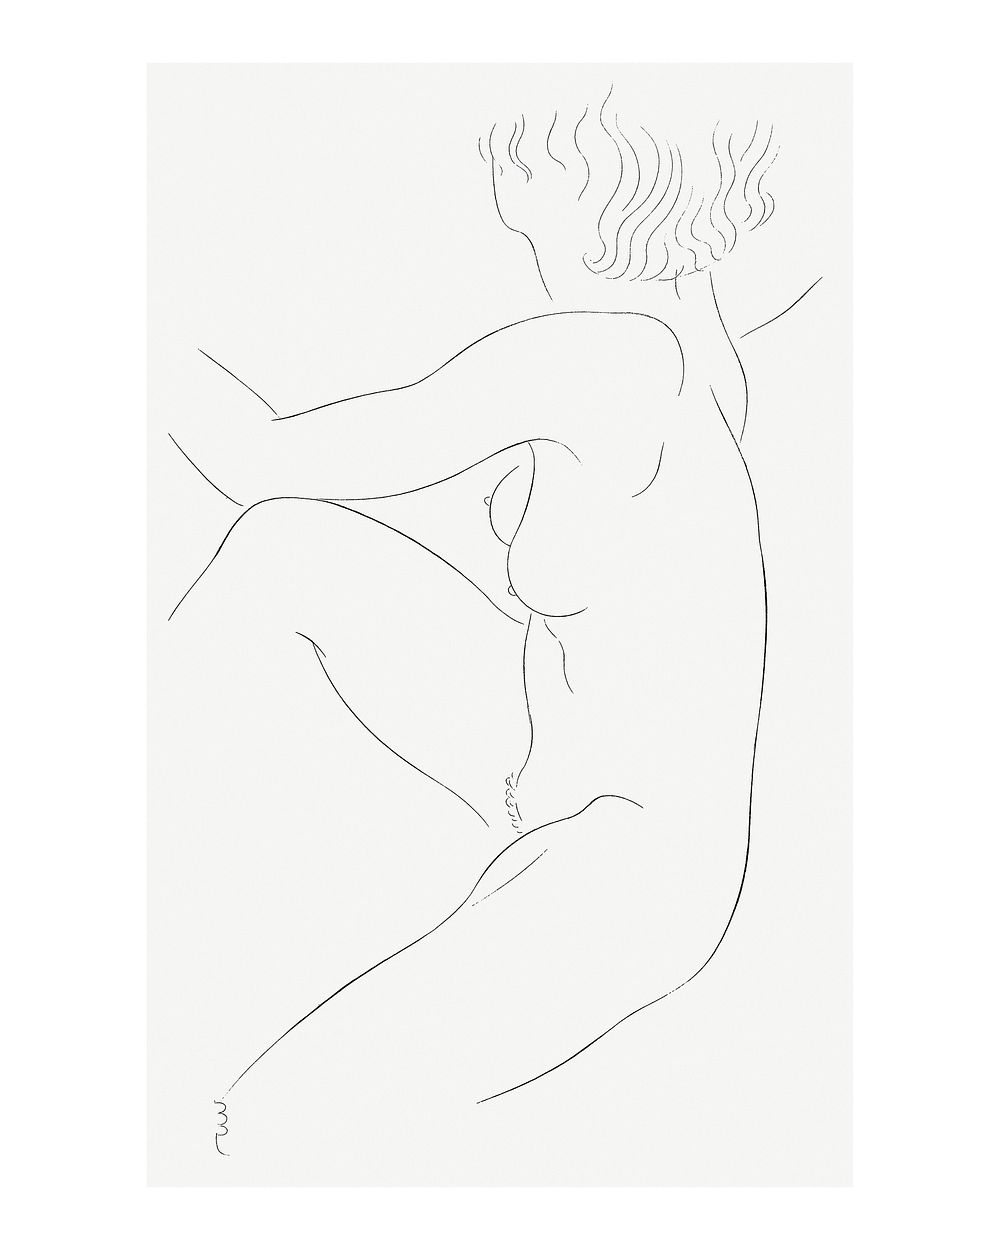 Naked woman line art poster, remixed from the artwork of Eric Gill